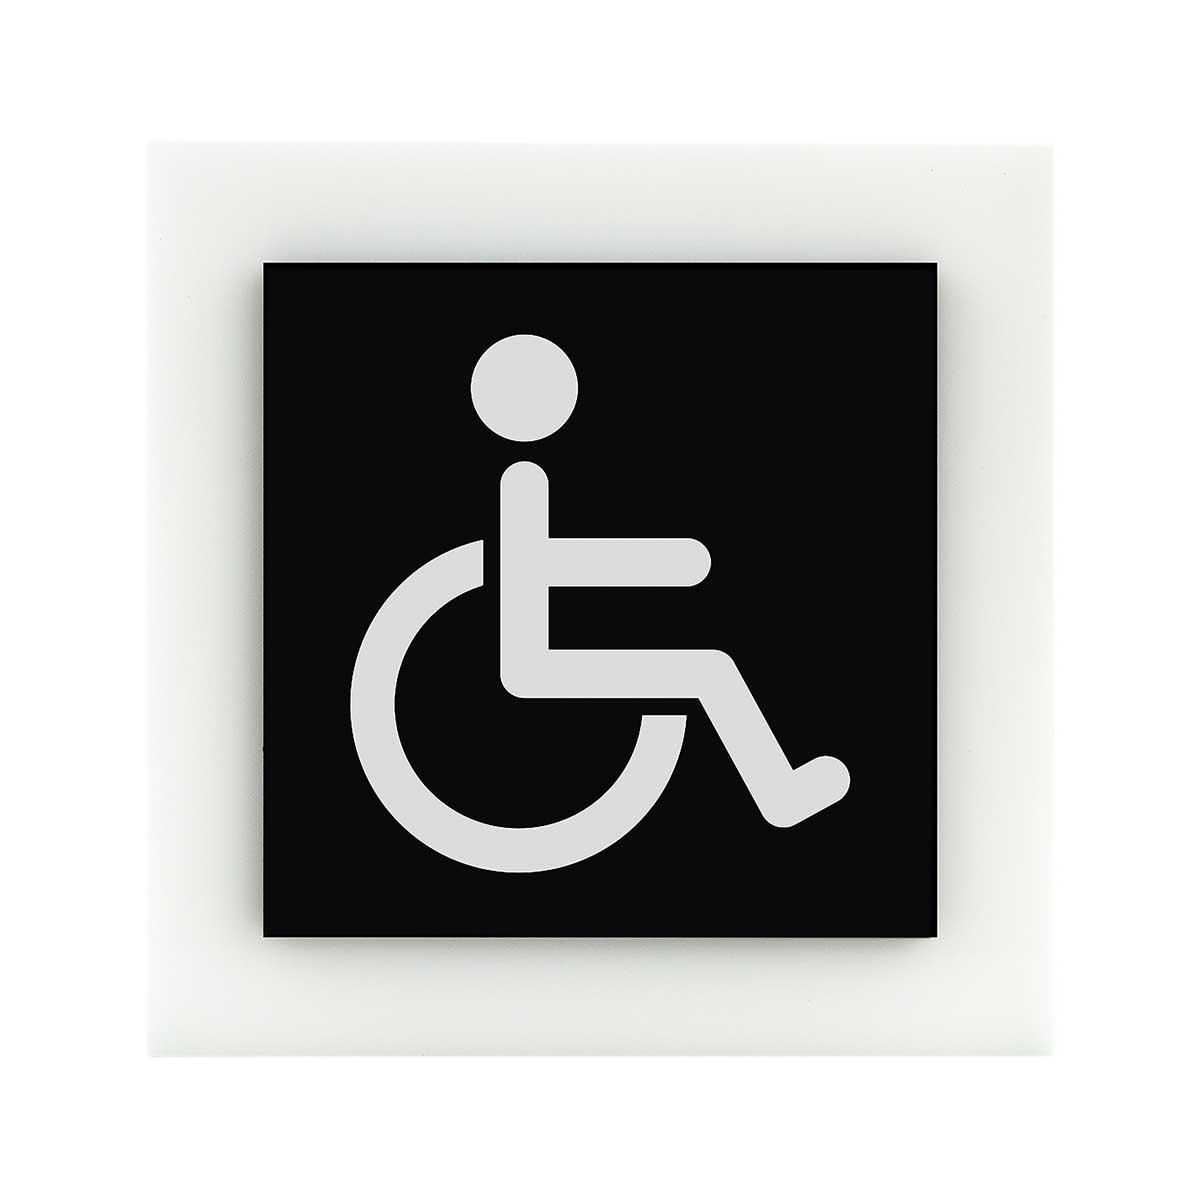 Restroom Wheelchairs Signs Bathroom Signs black/white symbol Bsign